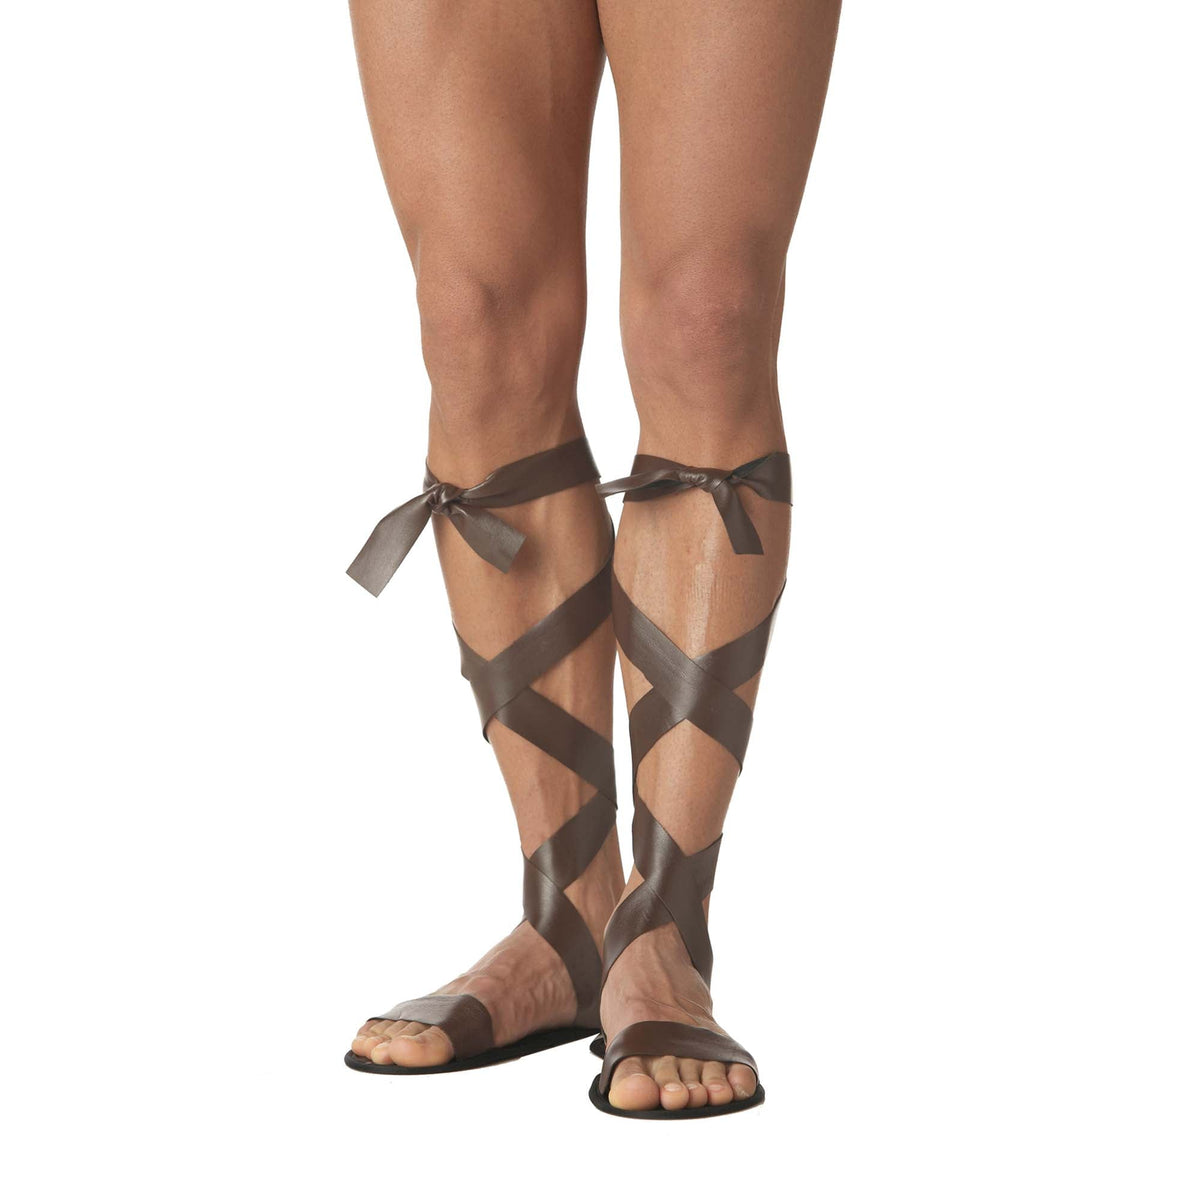 CALIFORNIA COSTUMES Costumes Roman sandals costume accessory for Adults